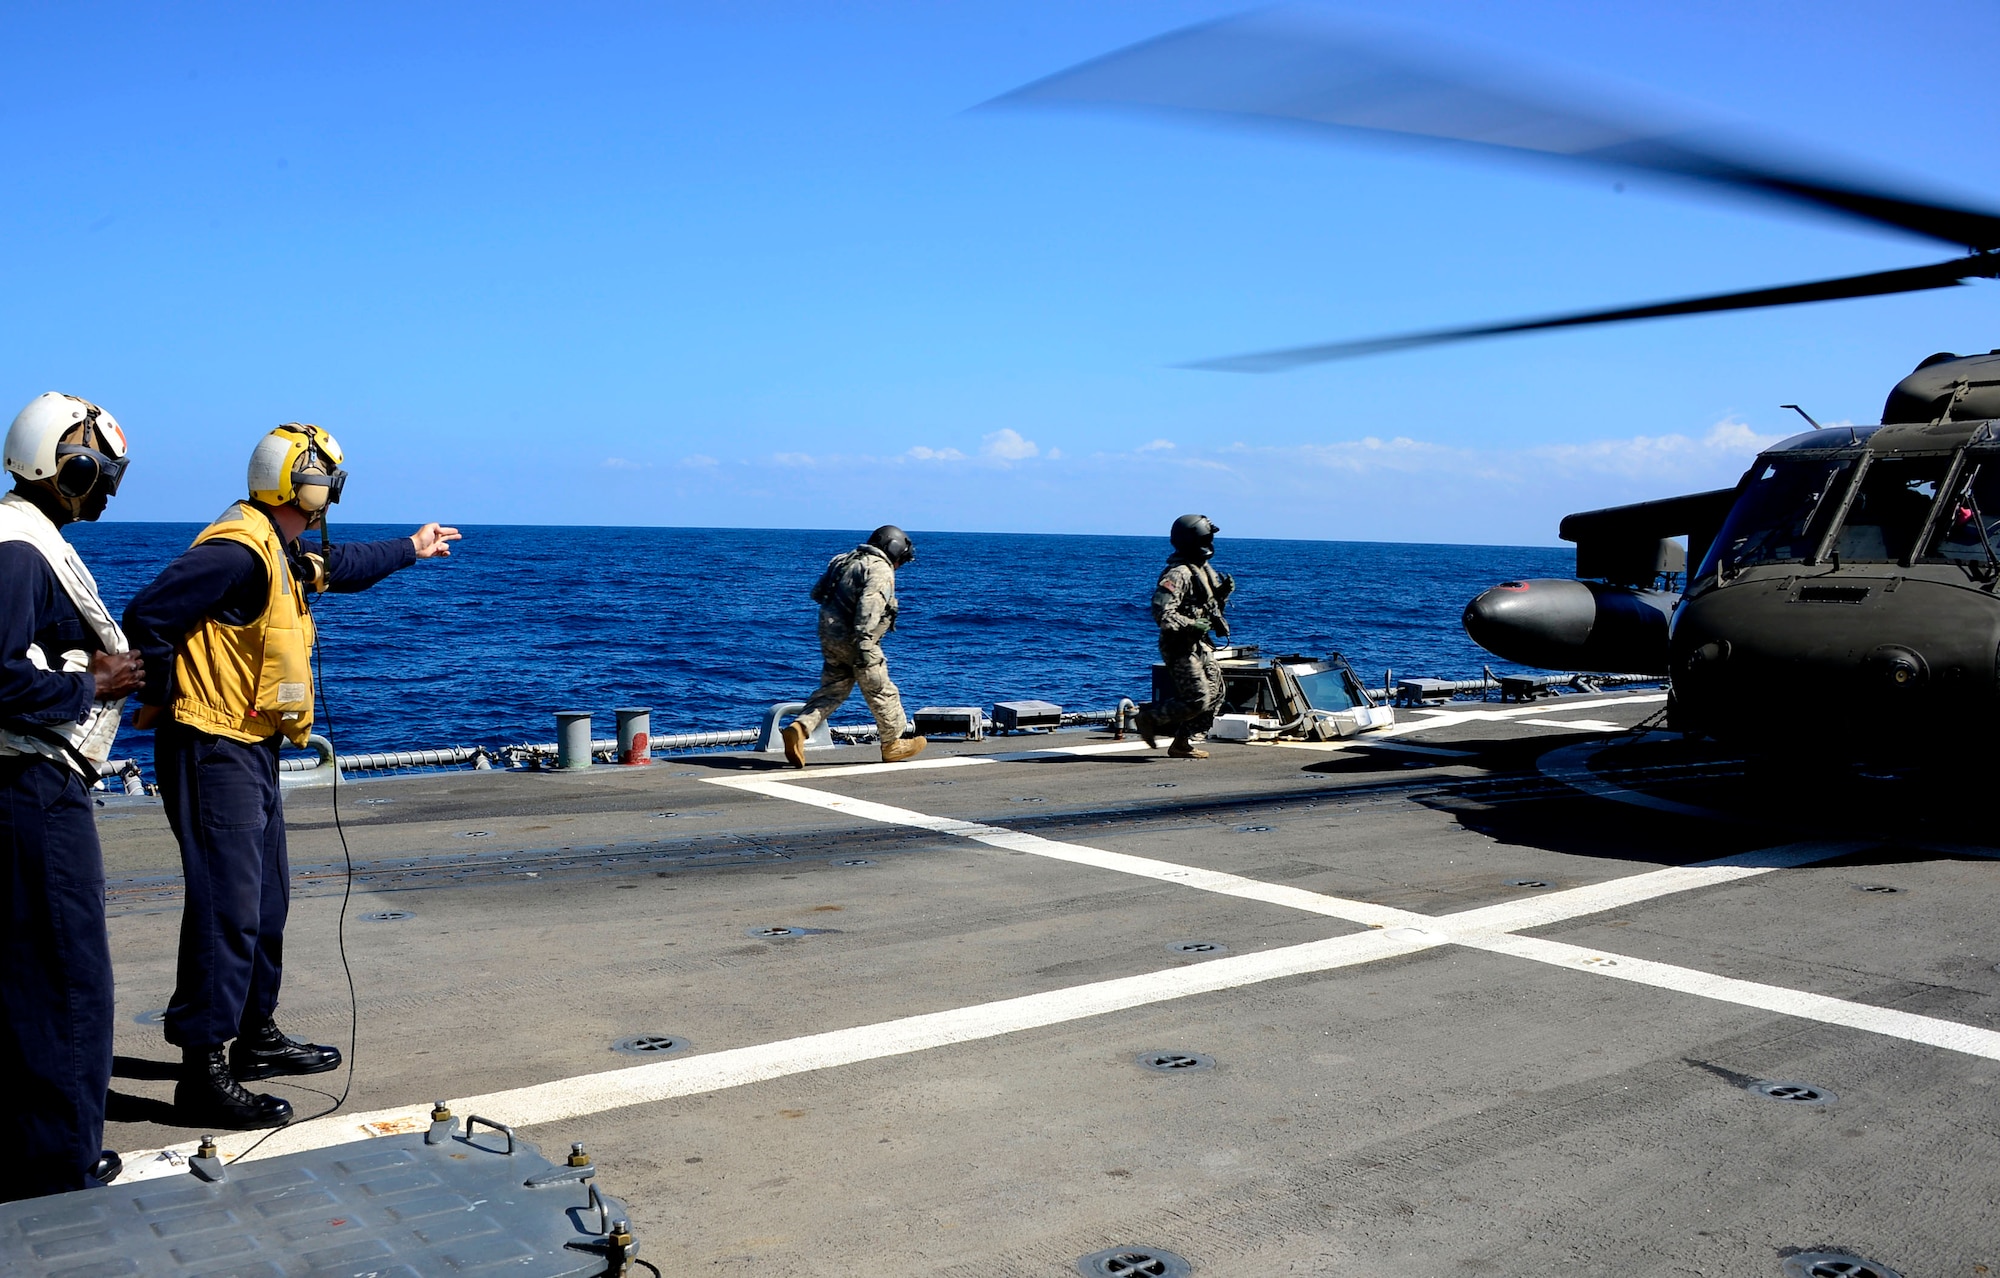 A U.S. Navy aircraft handling officer signals for members of the 1st Battalion, 228th Aviation Regiment to board a UH-60 Blackhawk helicopter during deck landing qualifications off the coast of Honduras, Feb. 1, 2015.  The 1-228th Avn. Reg. aircrew participated in deck landing qualifications on board the USS Kauffman to qualify pilots and crew chiefs on shipboard operations.  Kauffman is on its final scheduled deployment to the U.S. Southern Command area of responsibility supporting multinational, counter-narcotics operation known as Operation Martillo. (U.S. Air Force photo/Tech. Sgt. Heather Redman)